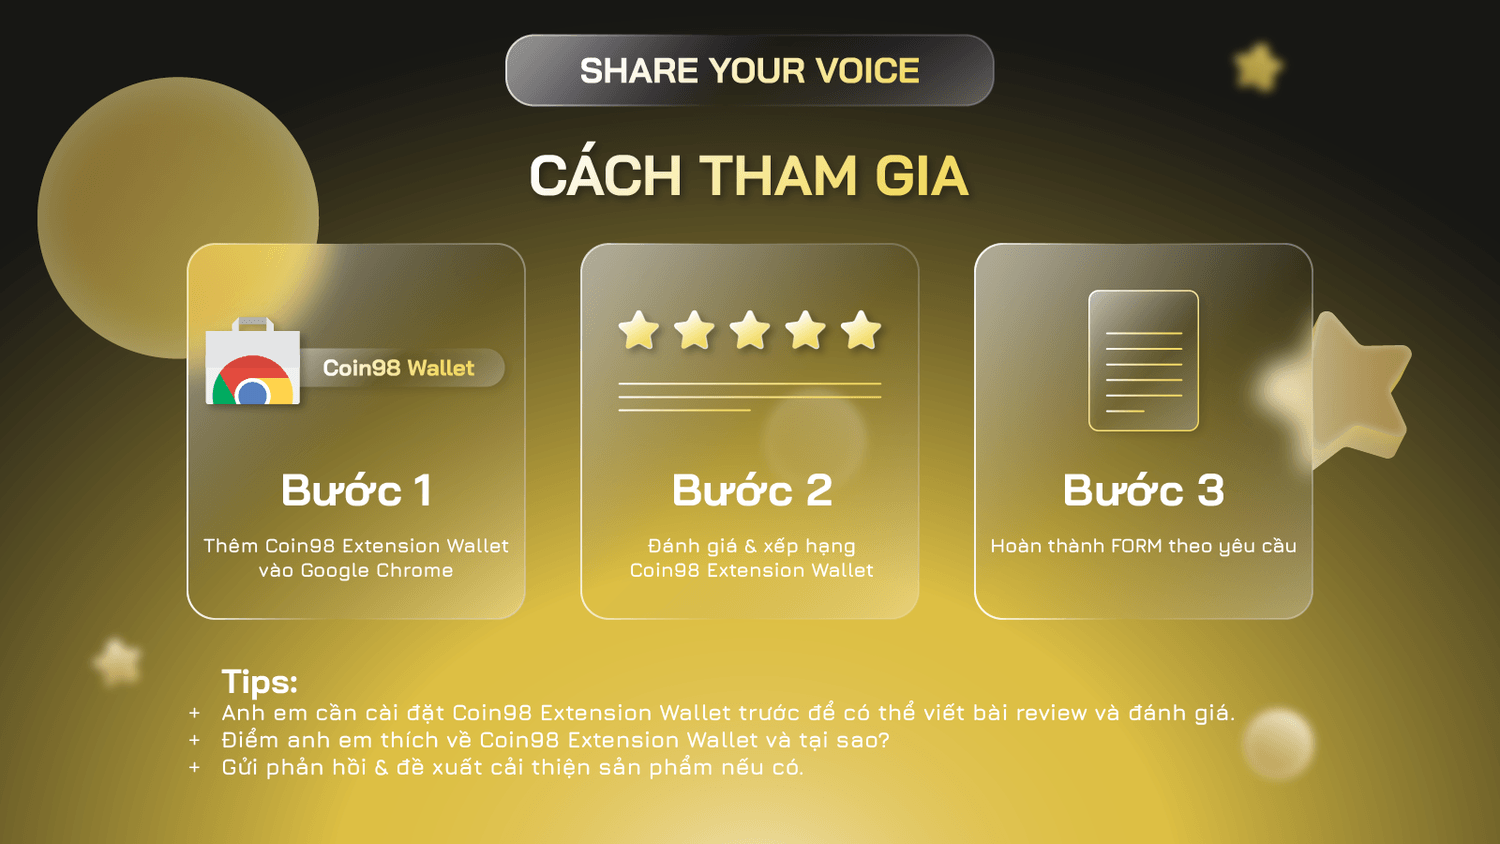 cách tham gia share your voice